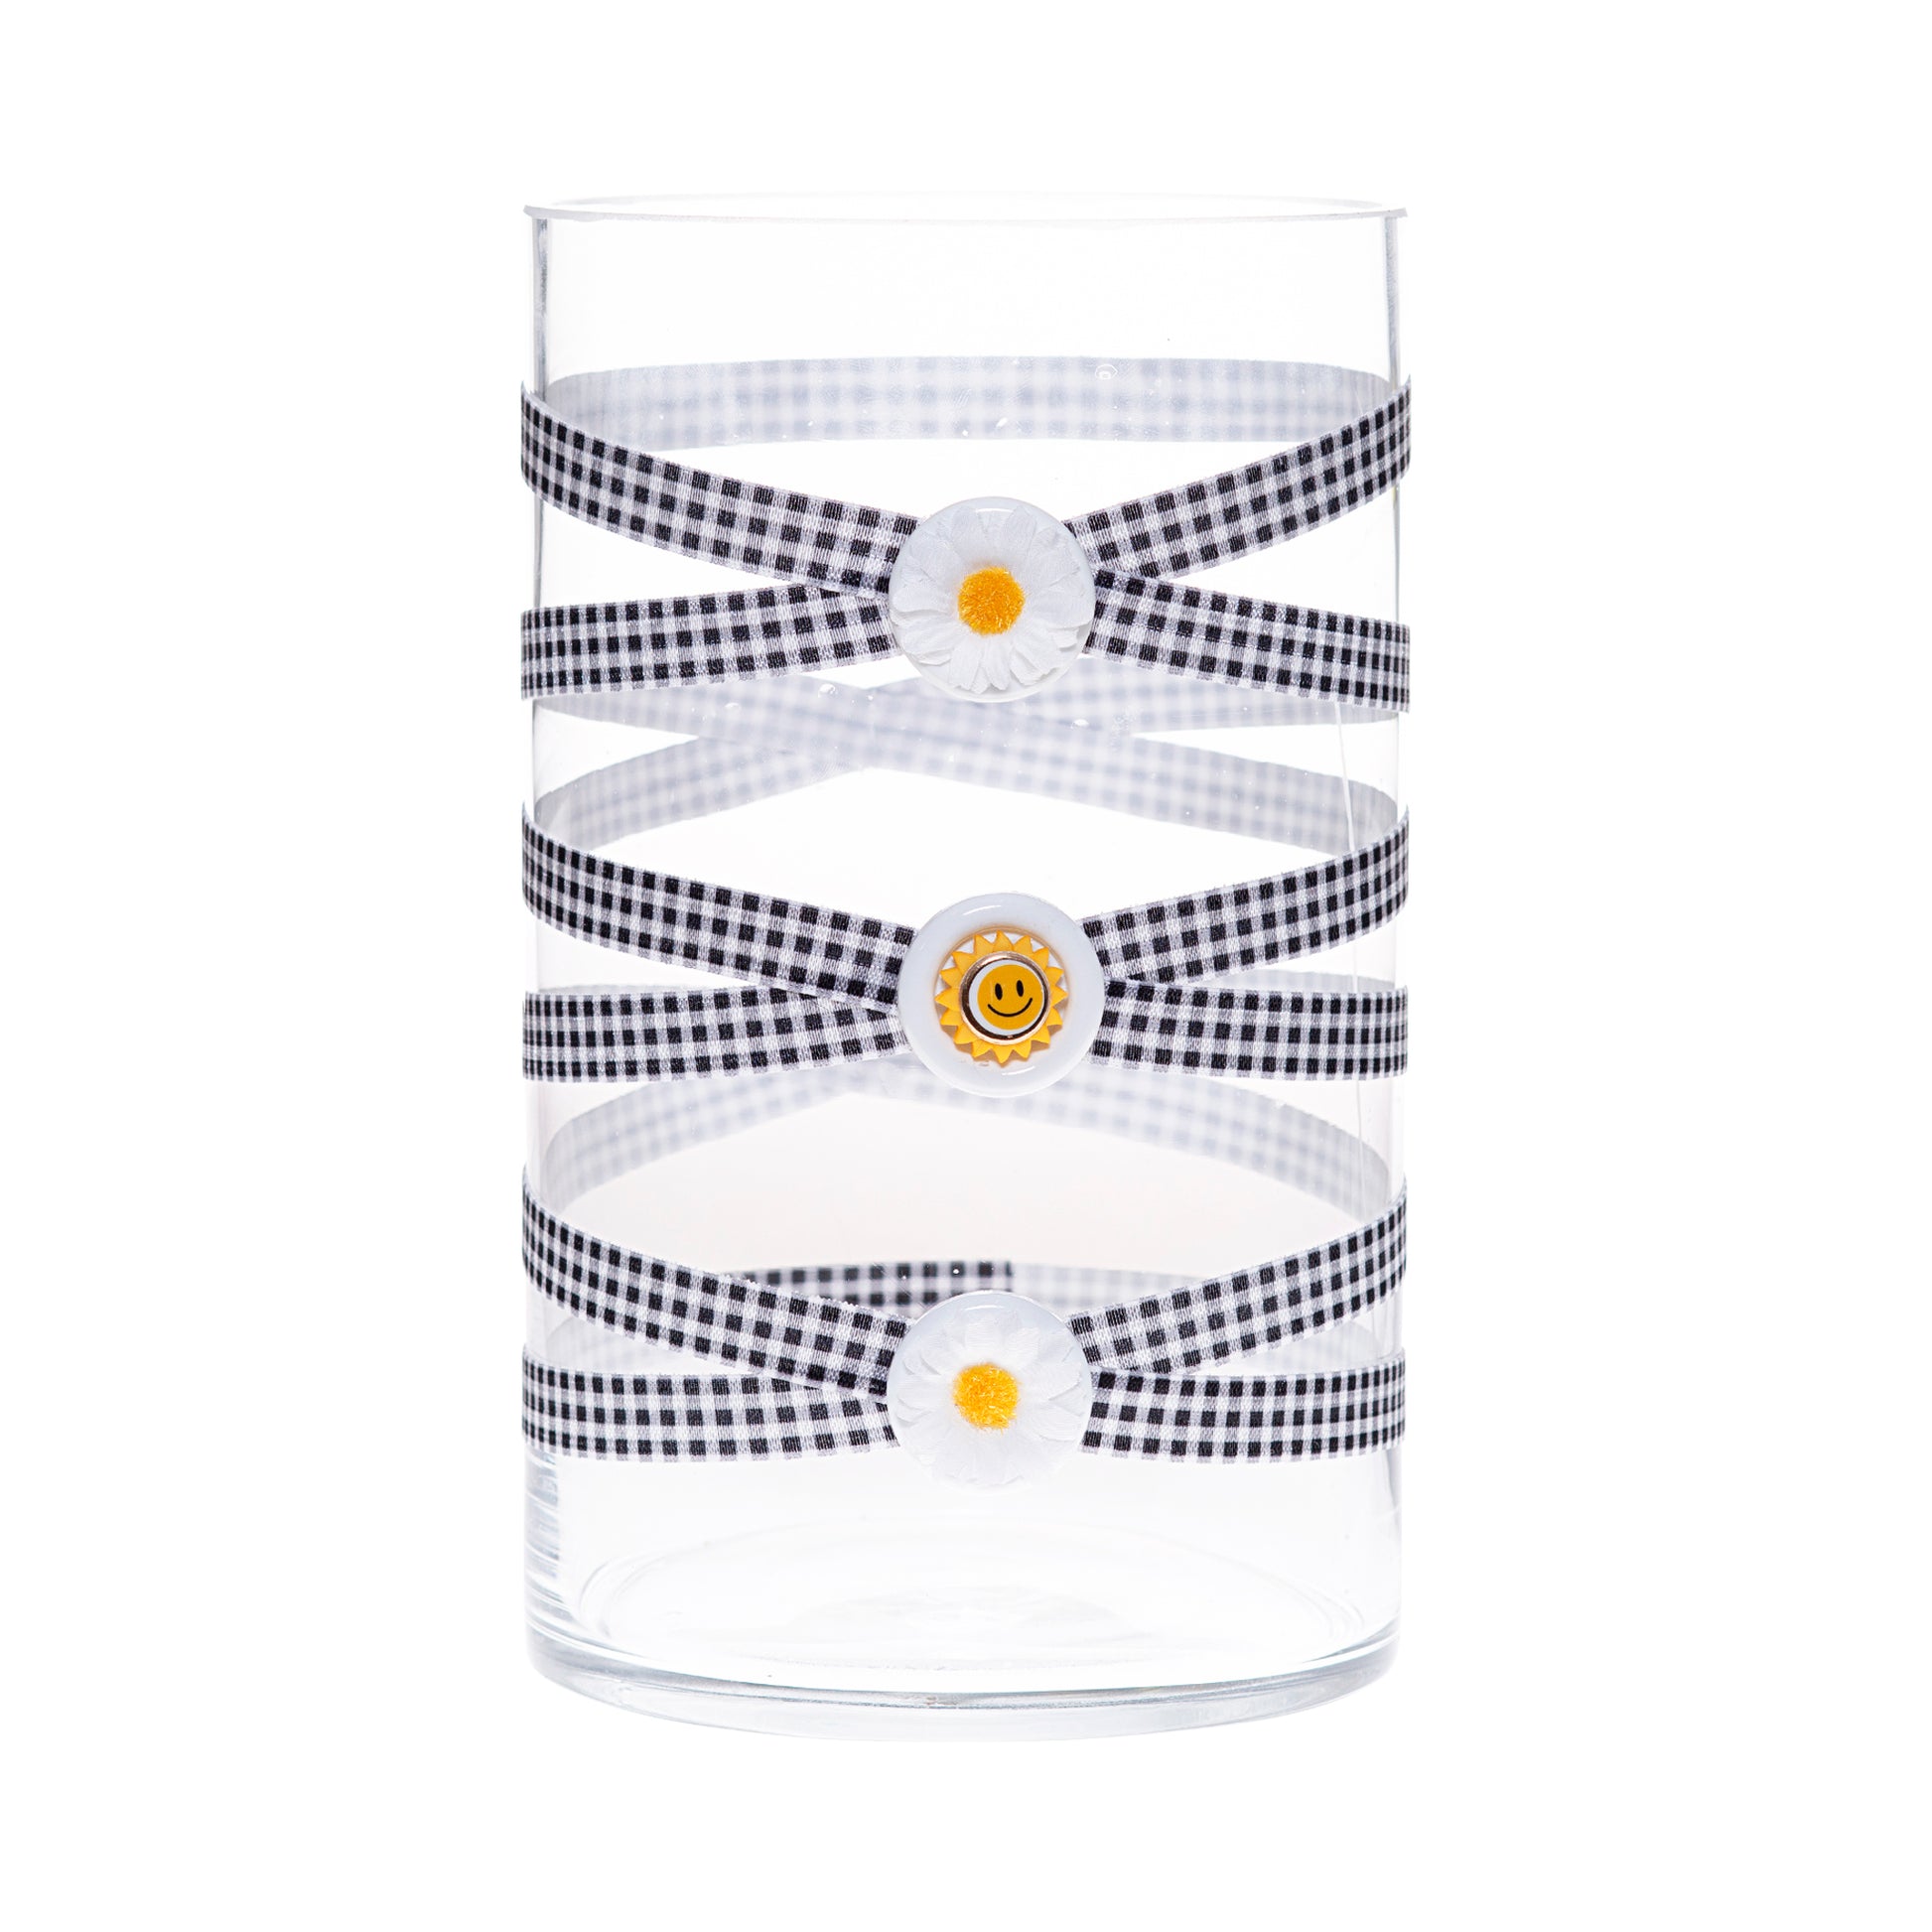 Back of Glass Wrappings 6" x 10" cylinder wrapped in black & white check elastic, decorated with 2 fabric daisies and 1 gold smiley.